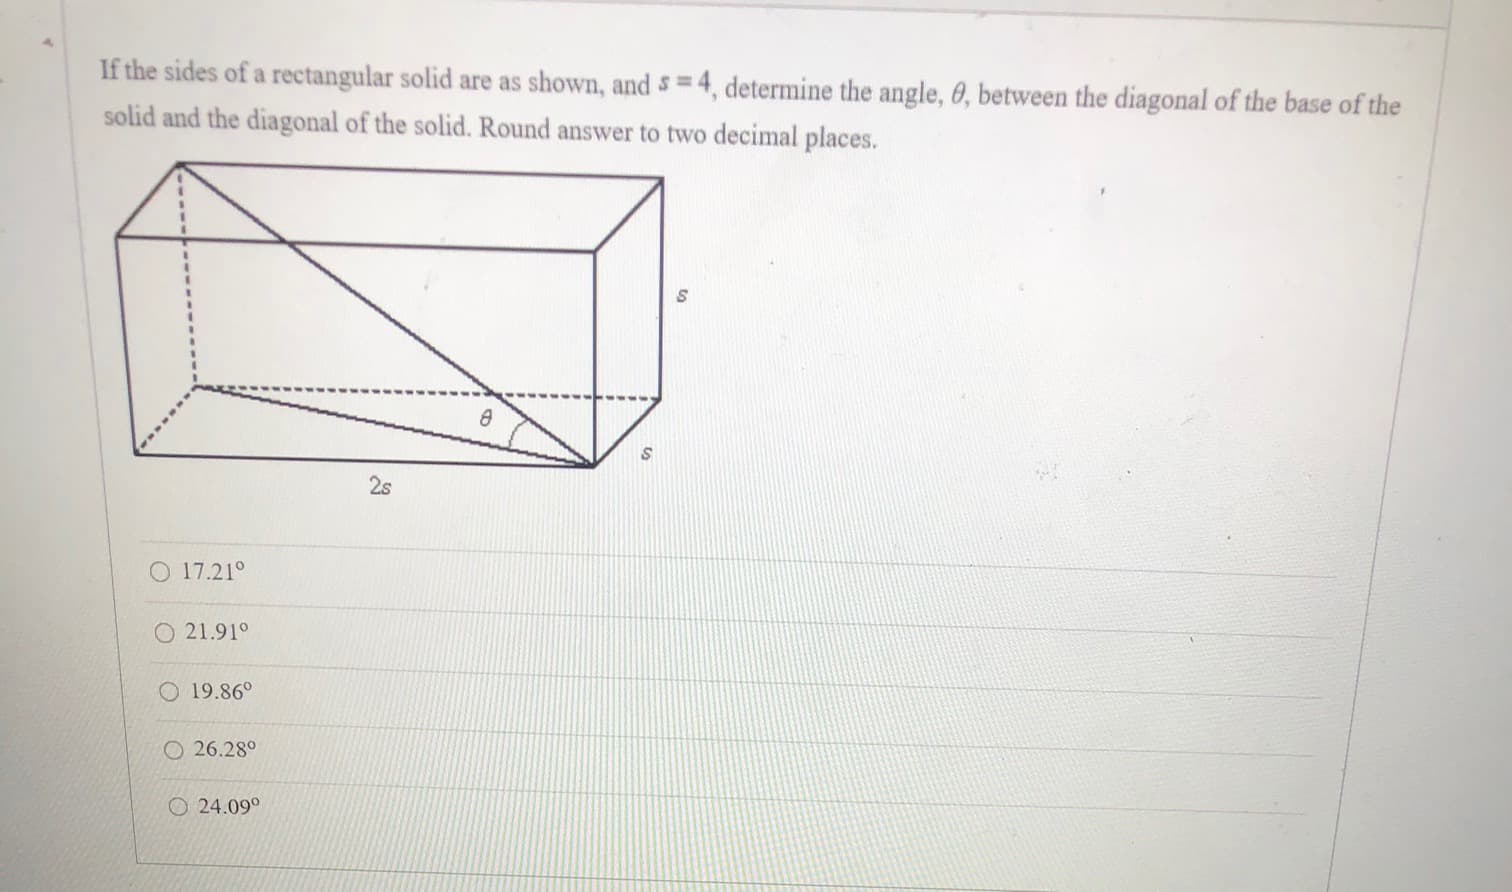 If the sides of a rectangular solid are as shown, and = 4, determine the angle, 0, between the diagonal of the base of the
solid and the diagonal of the solid. Round answer to two decimal places.
2s
